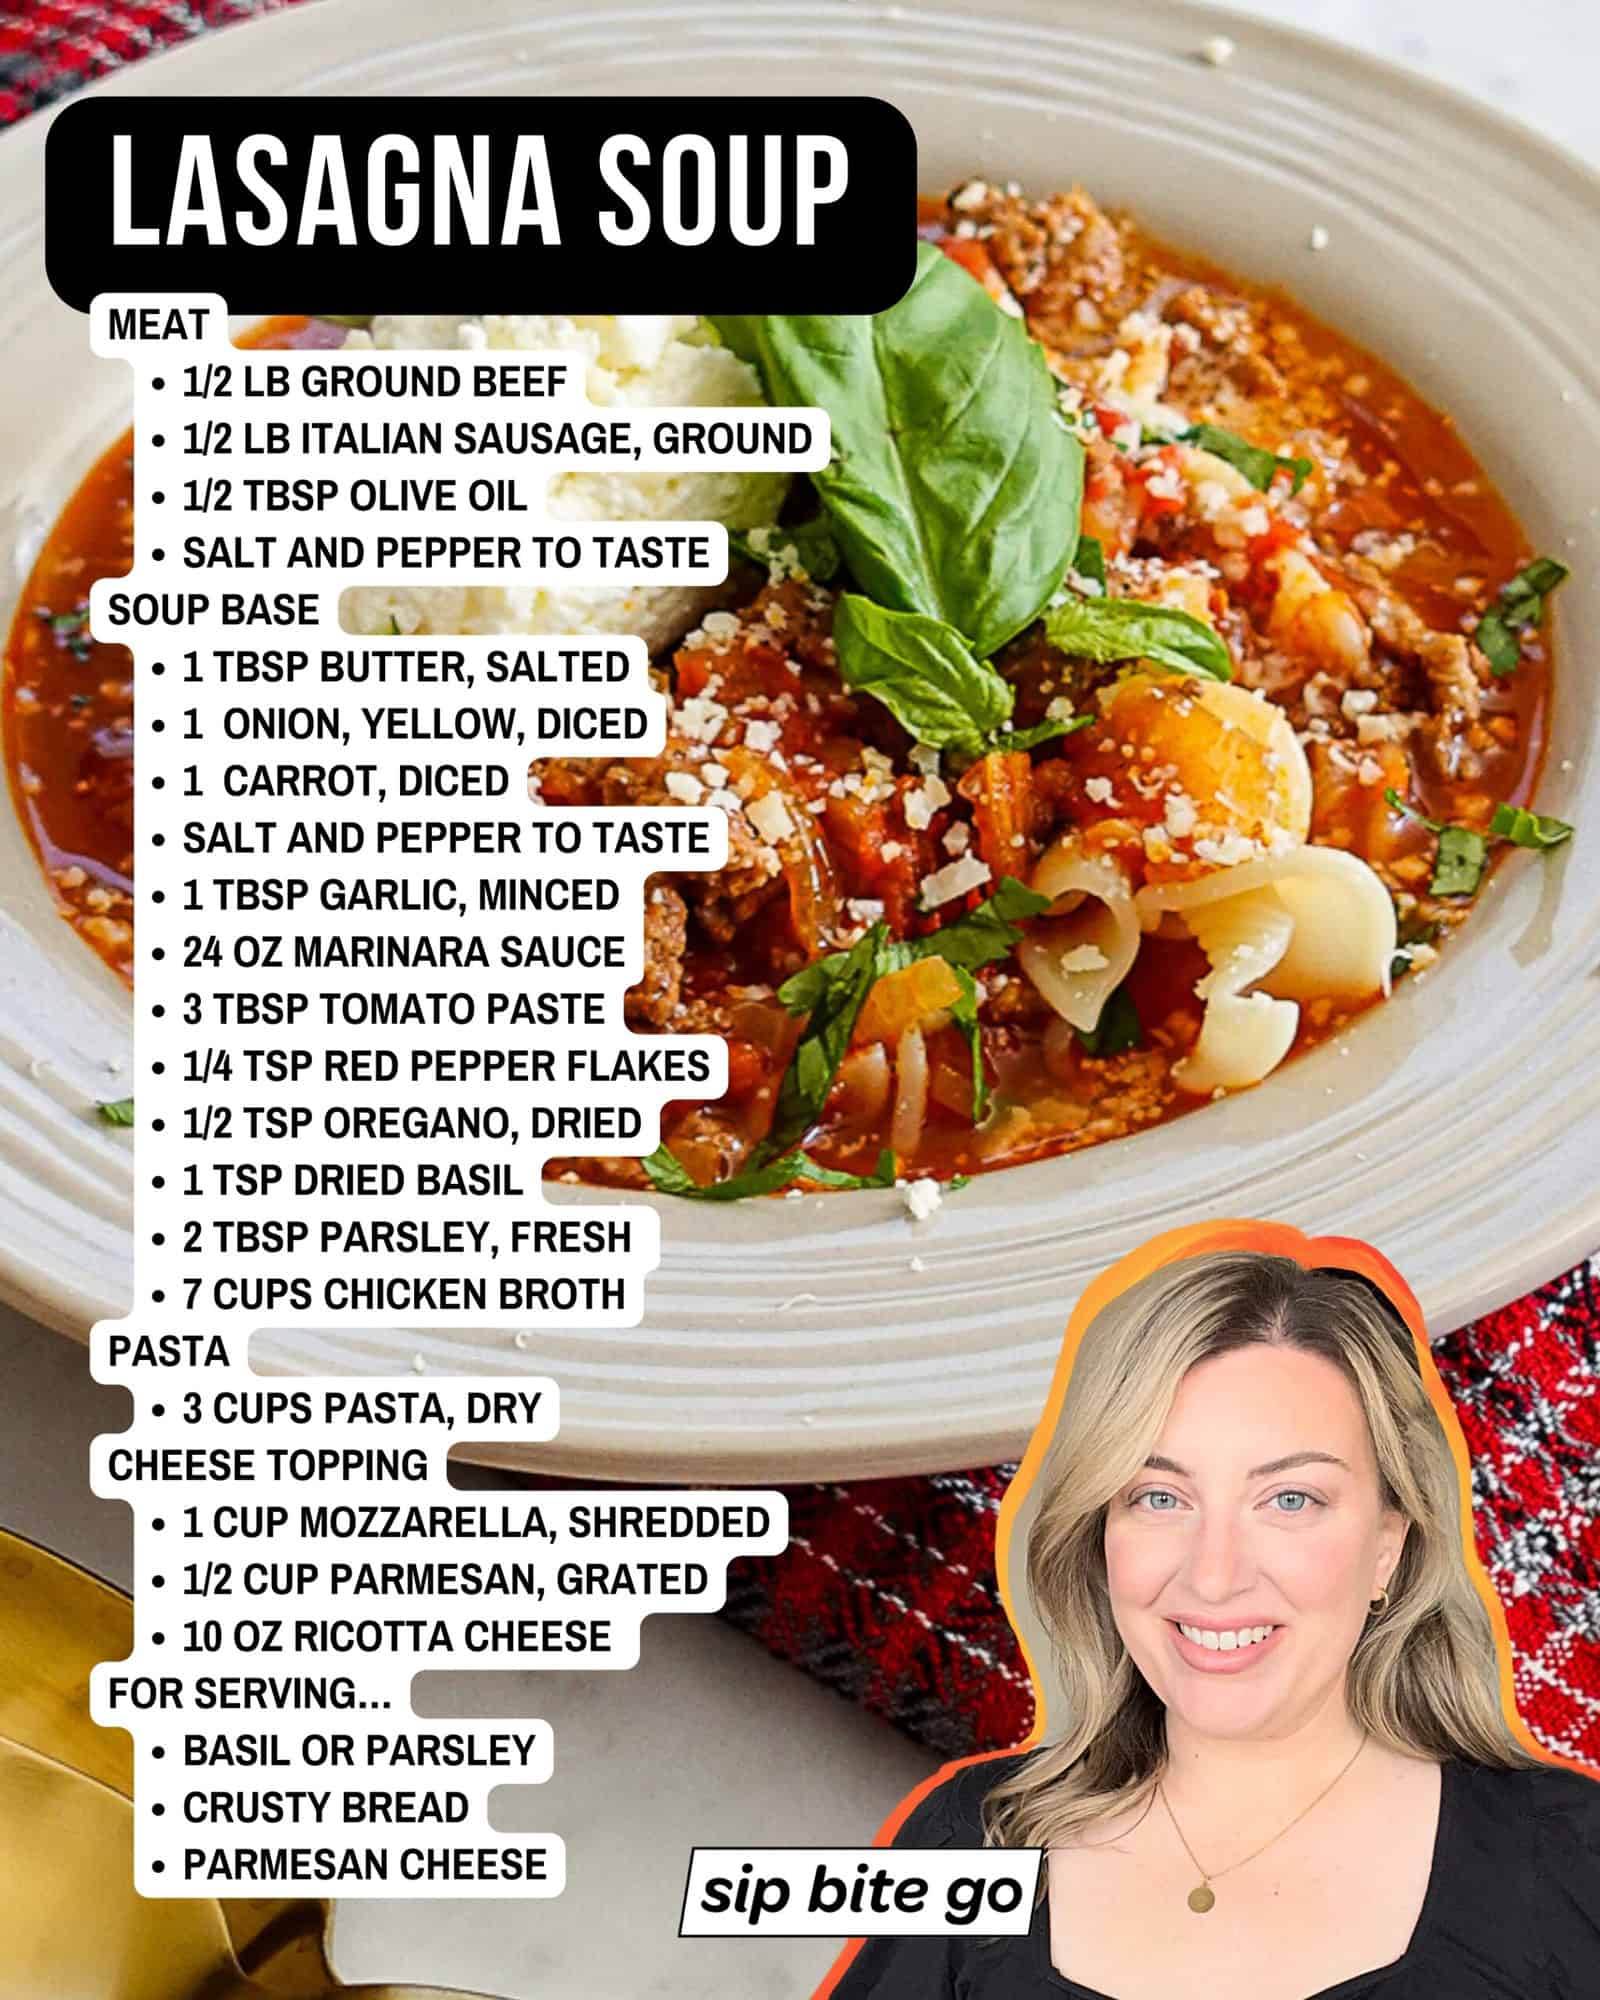 List of ingredients for Lasagna Soup with recipe image